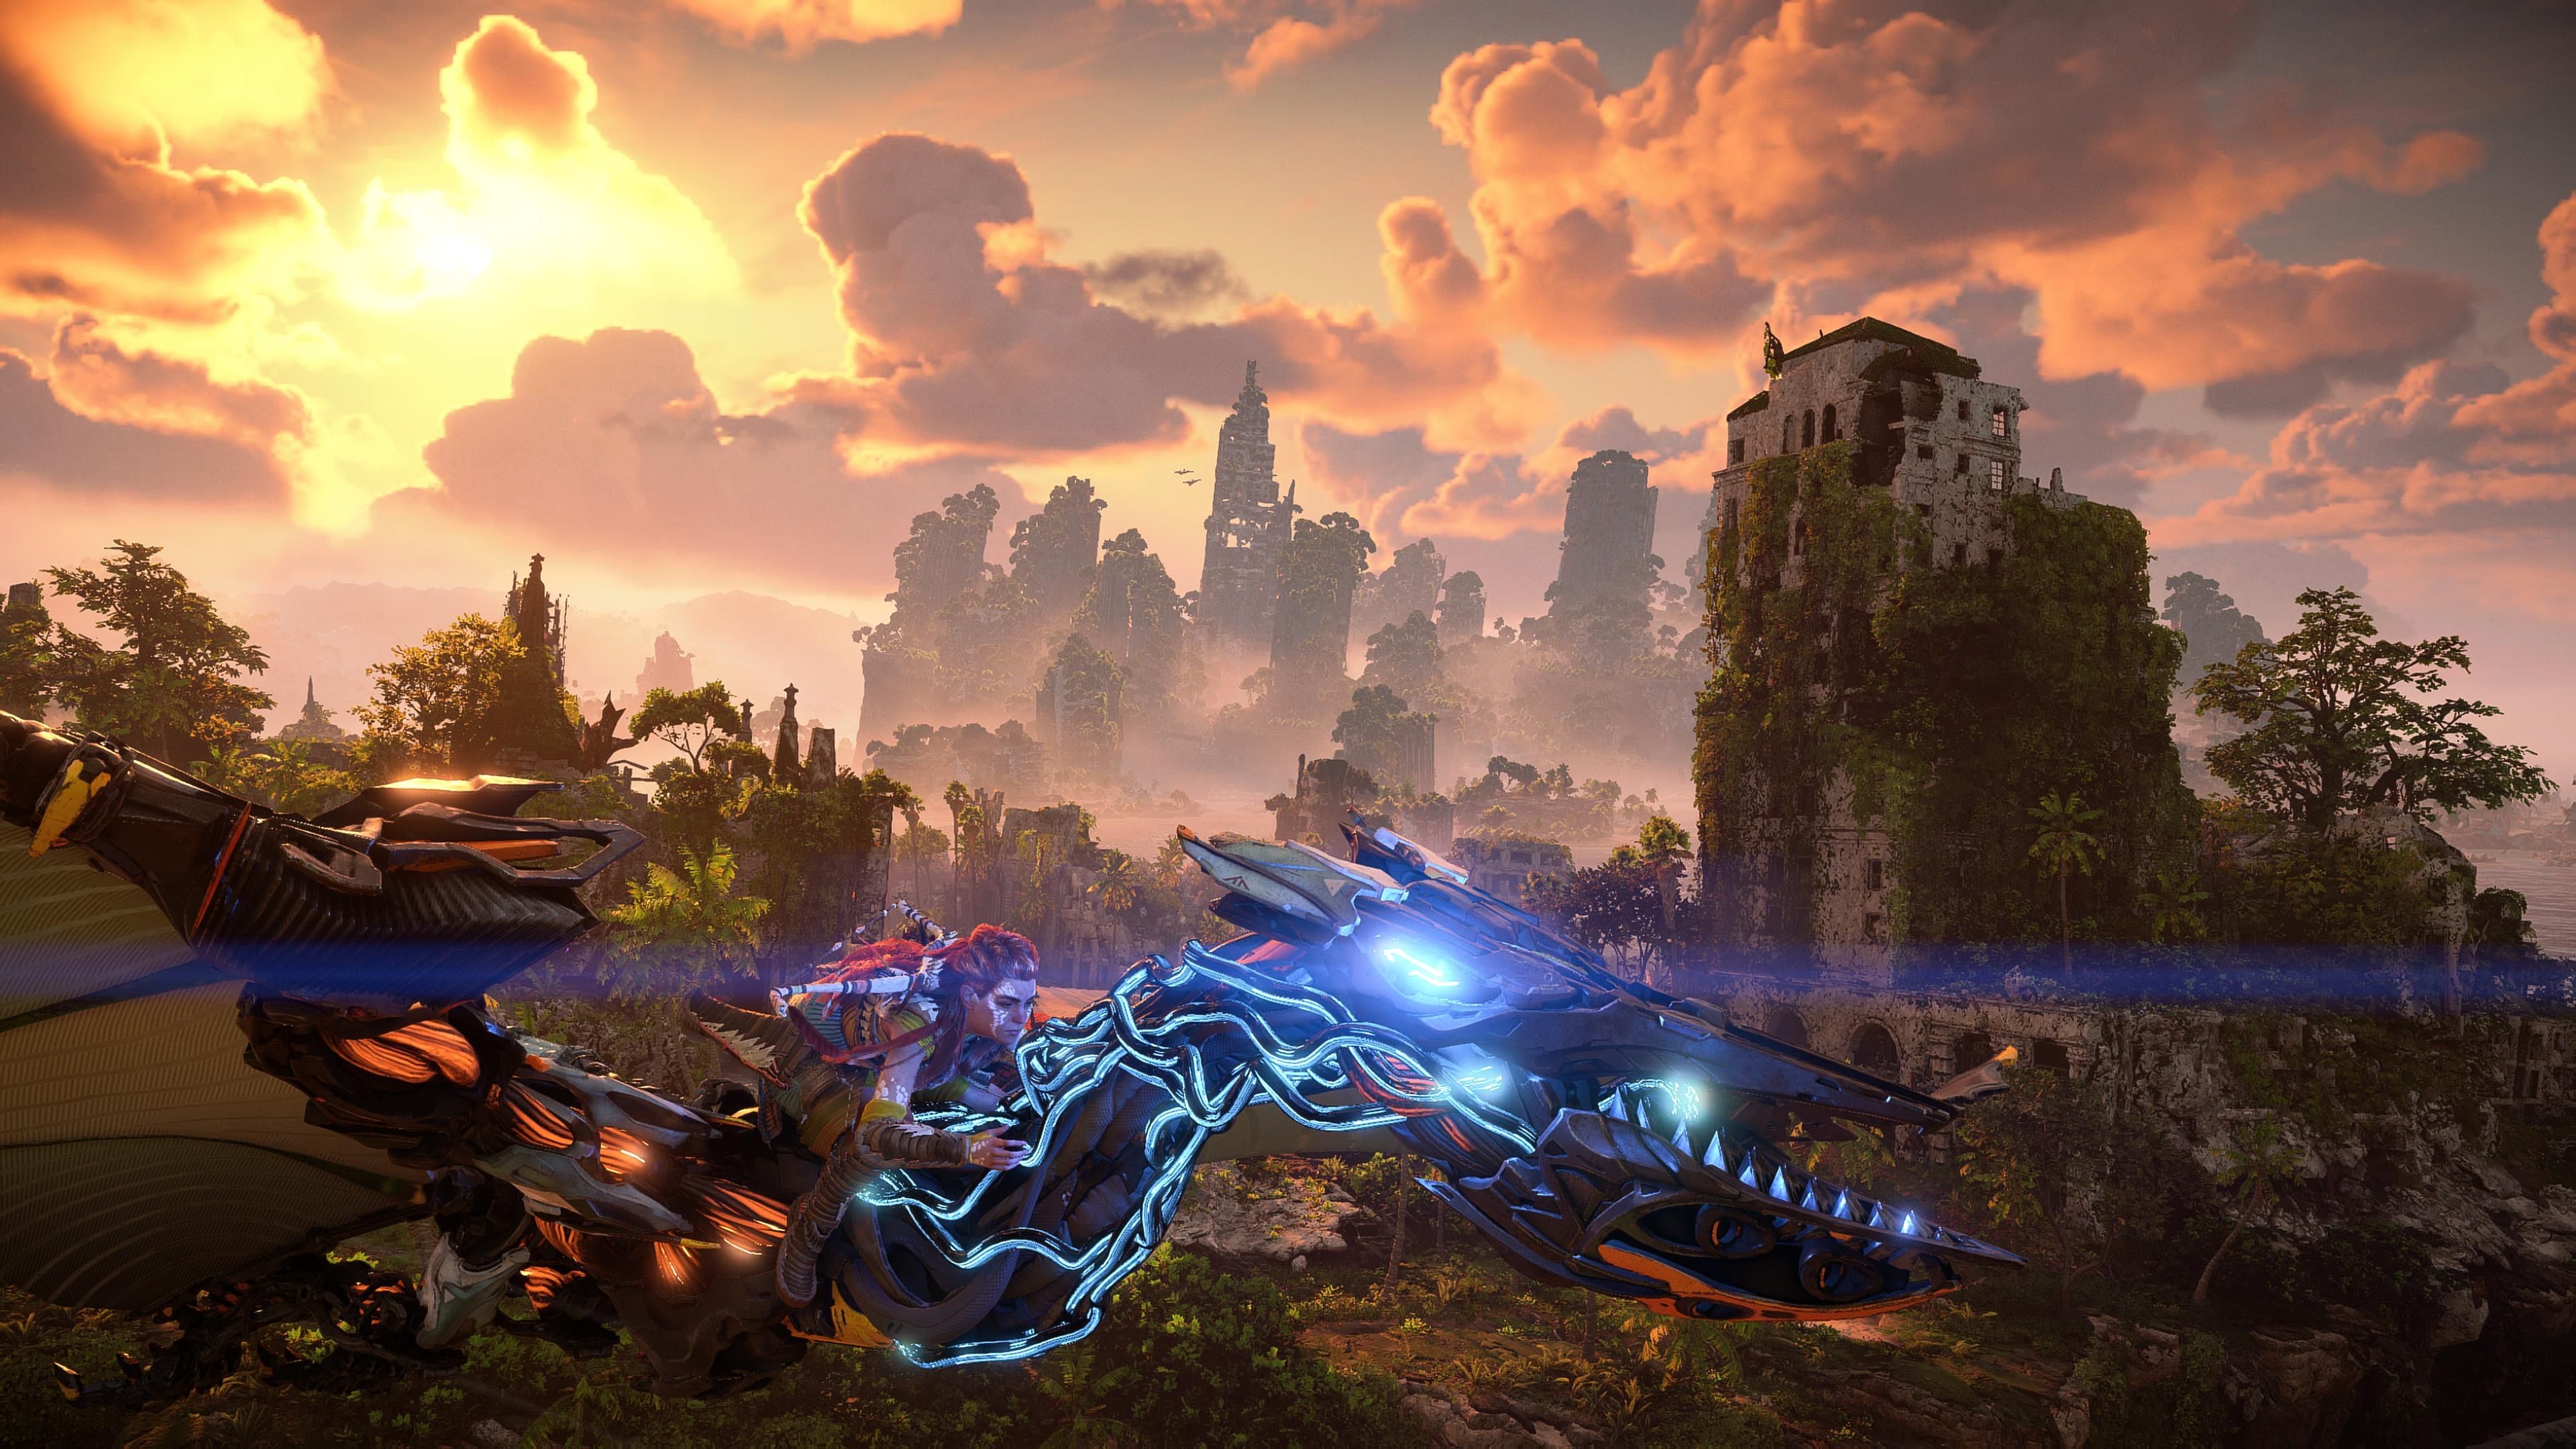 Aloy flying on a Waterwing in front of the sunsetting on the ruins of Los Angeles in Horizon Forbidden West: Burning Shores.